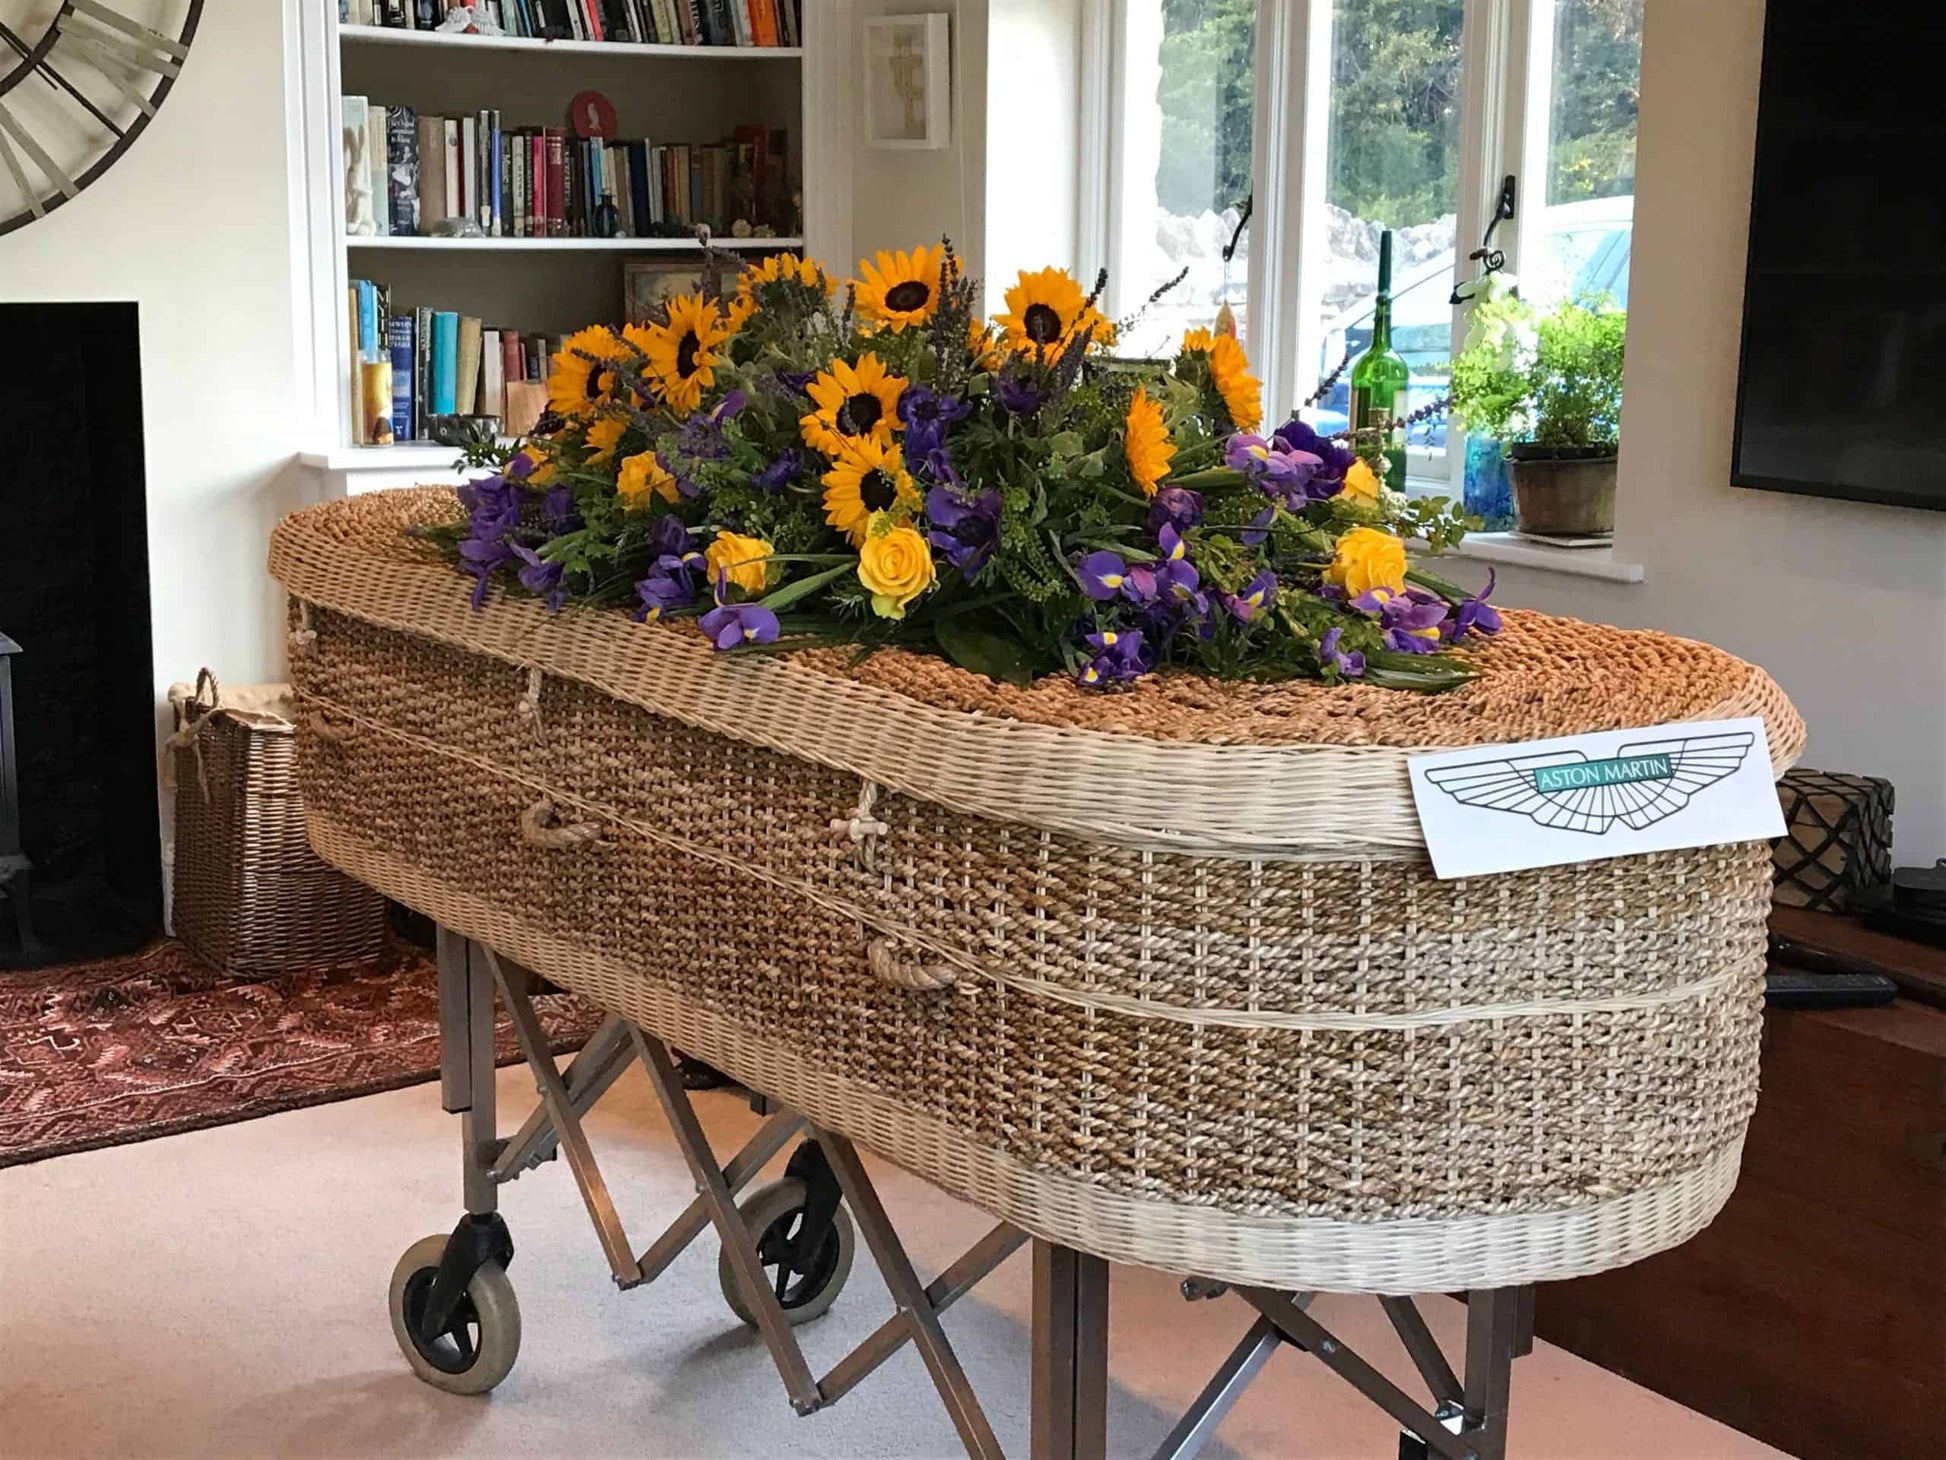 Artisanal woven coffin lavishly adorned with bright sunflowers, purple blooms, and yellow roses, presented in a cozy room with a view of a garden.